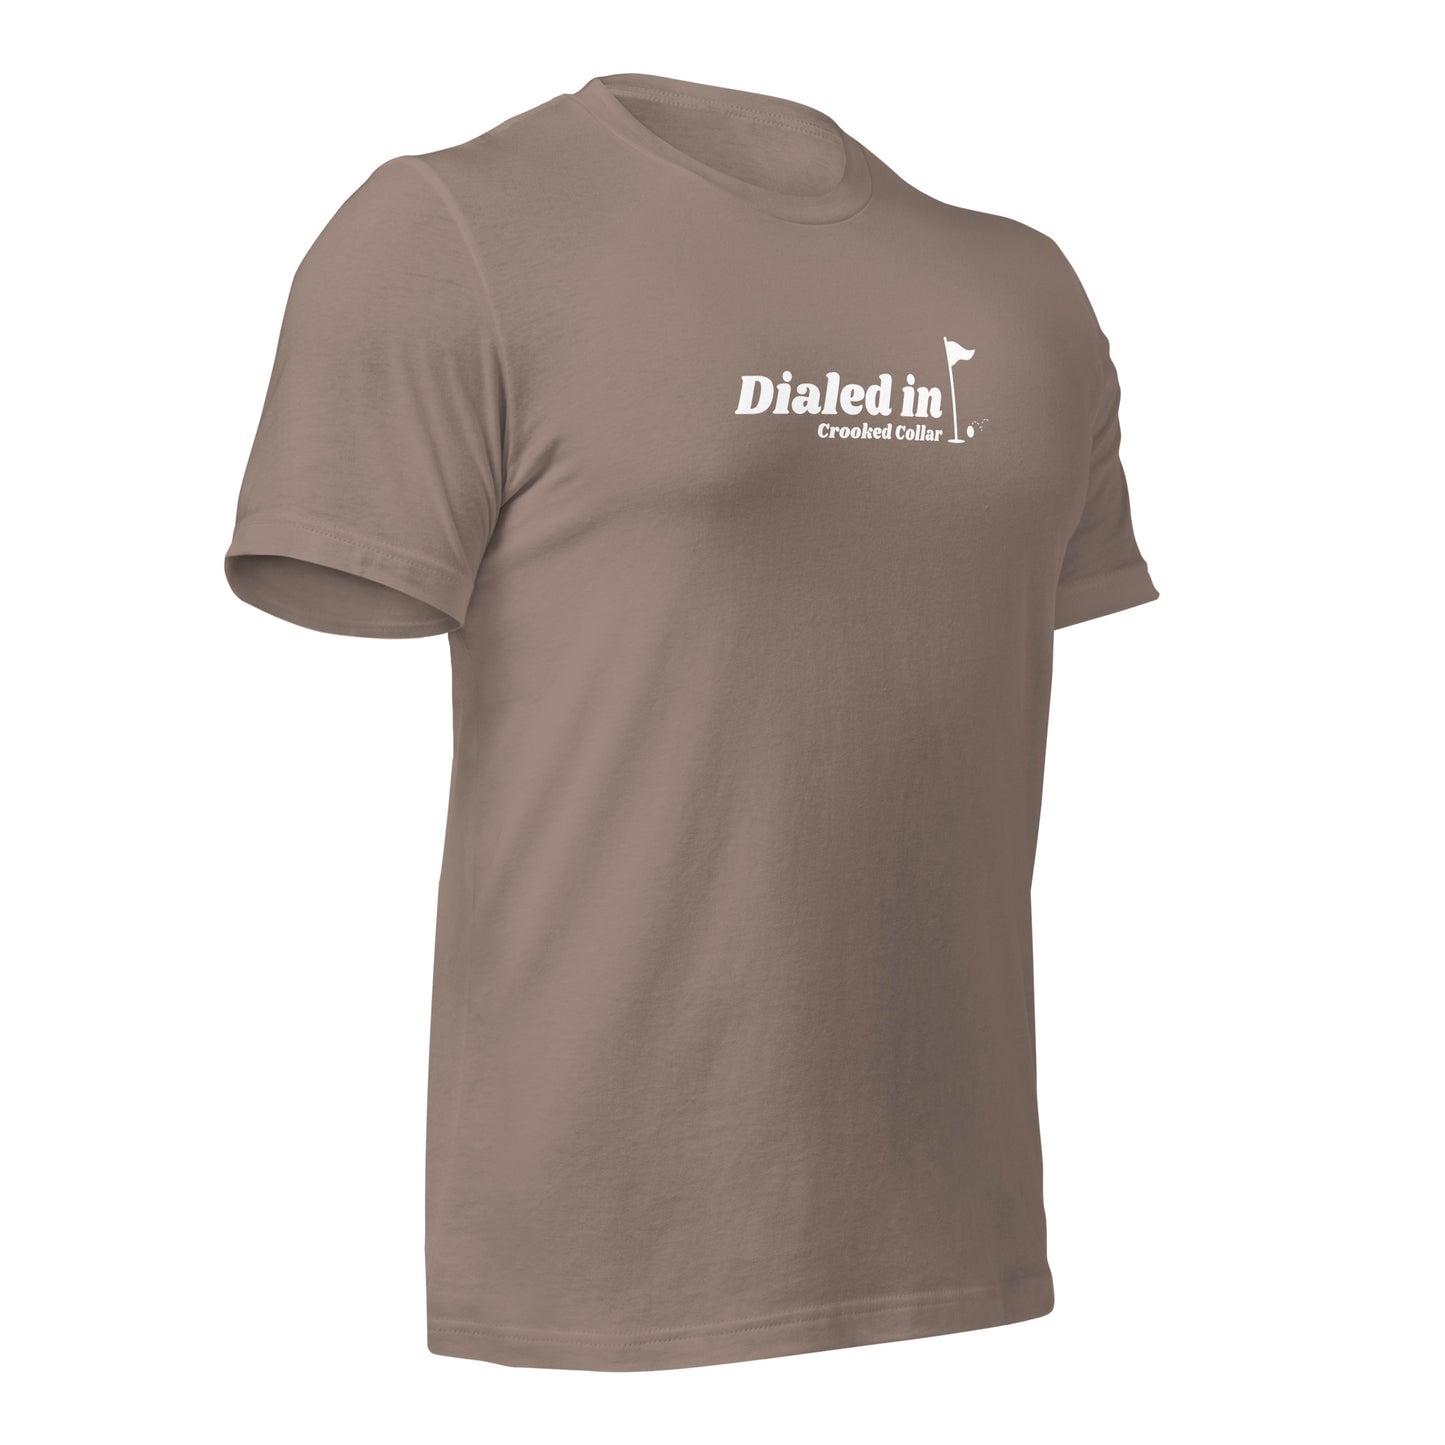 Dialed In Unisex T-Shirt